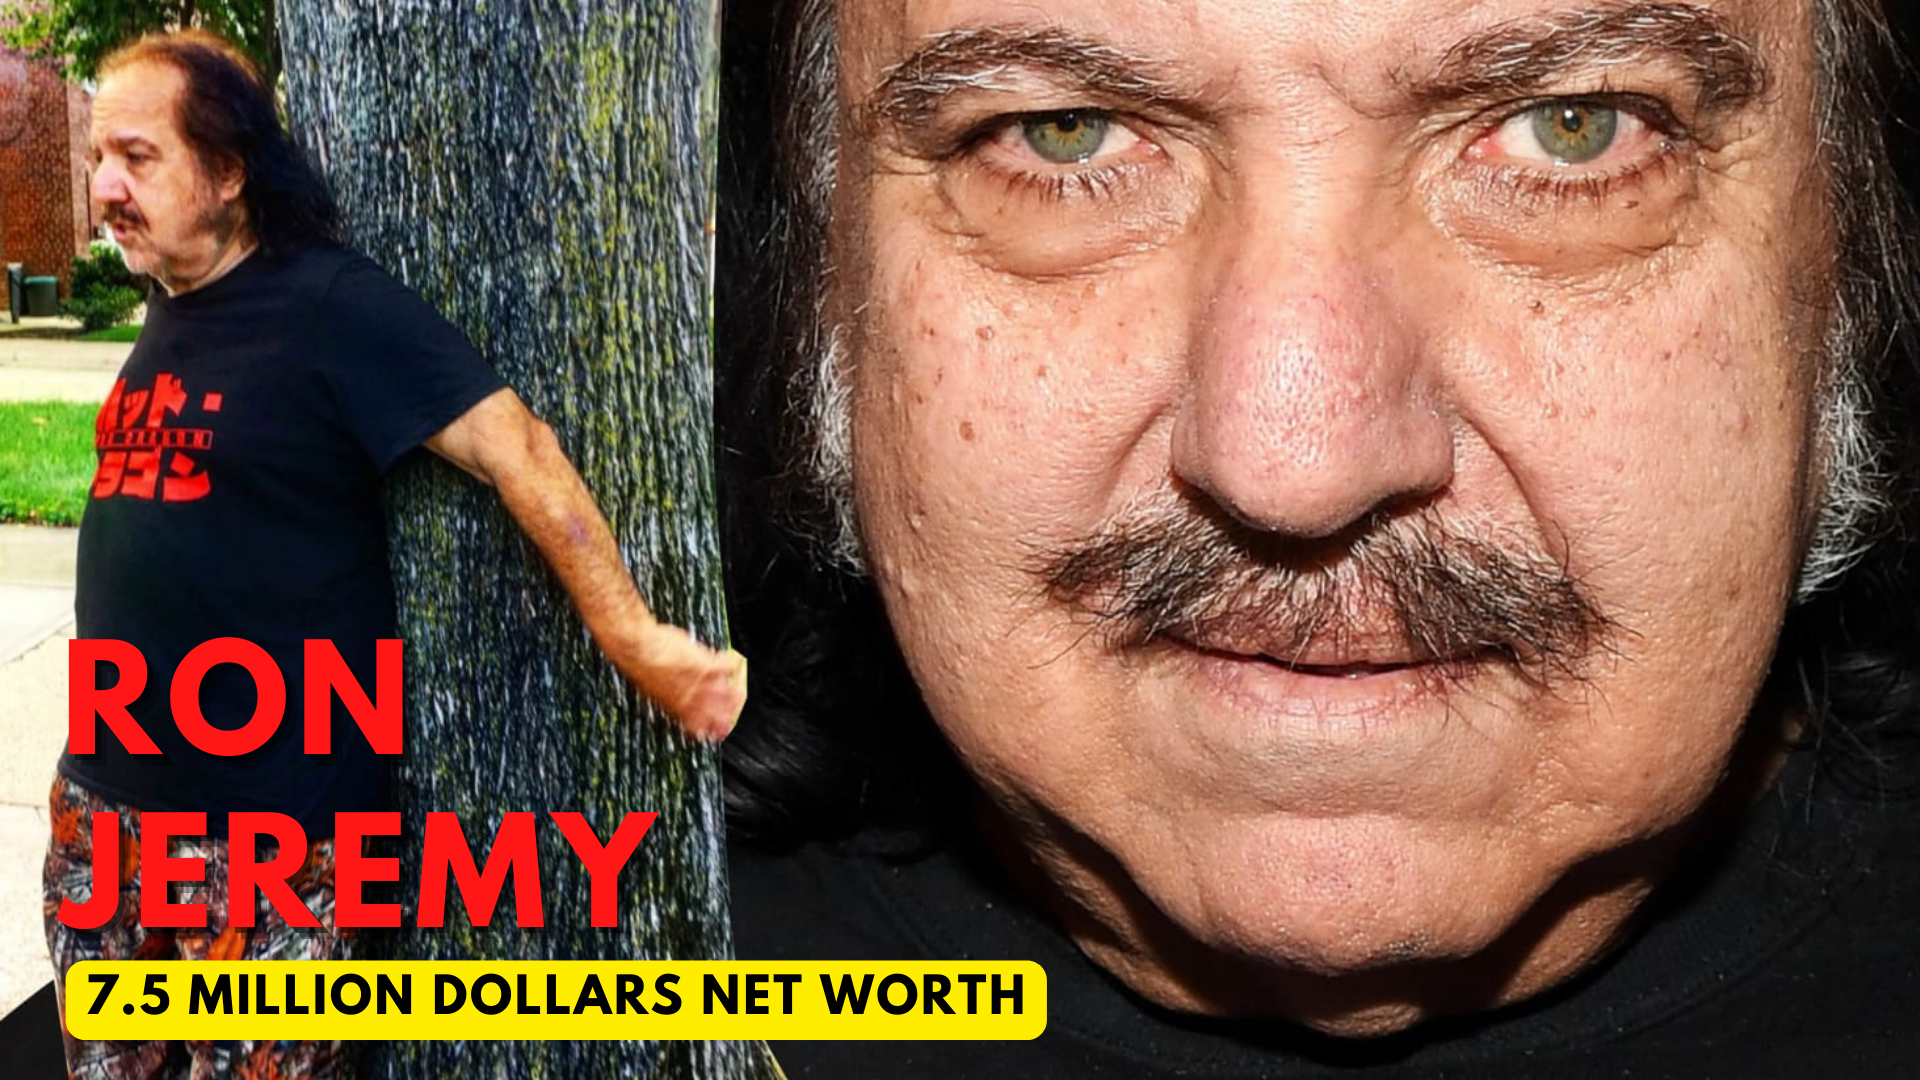 Ron Jeremy holding on a tree and his close up face on the left